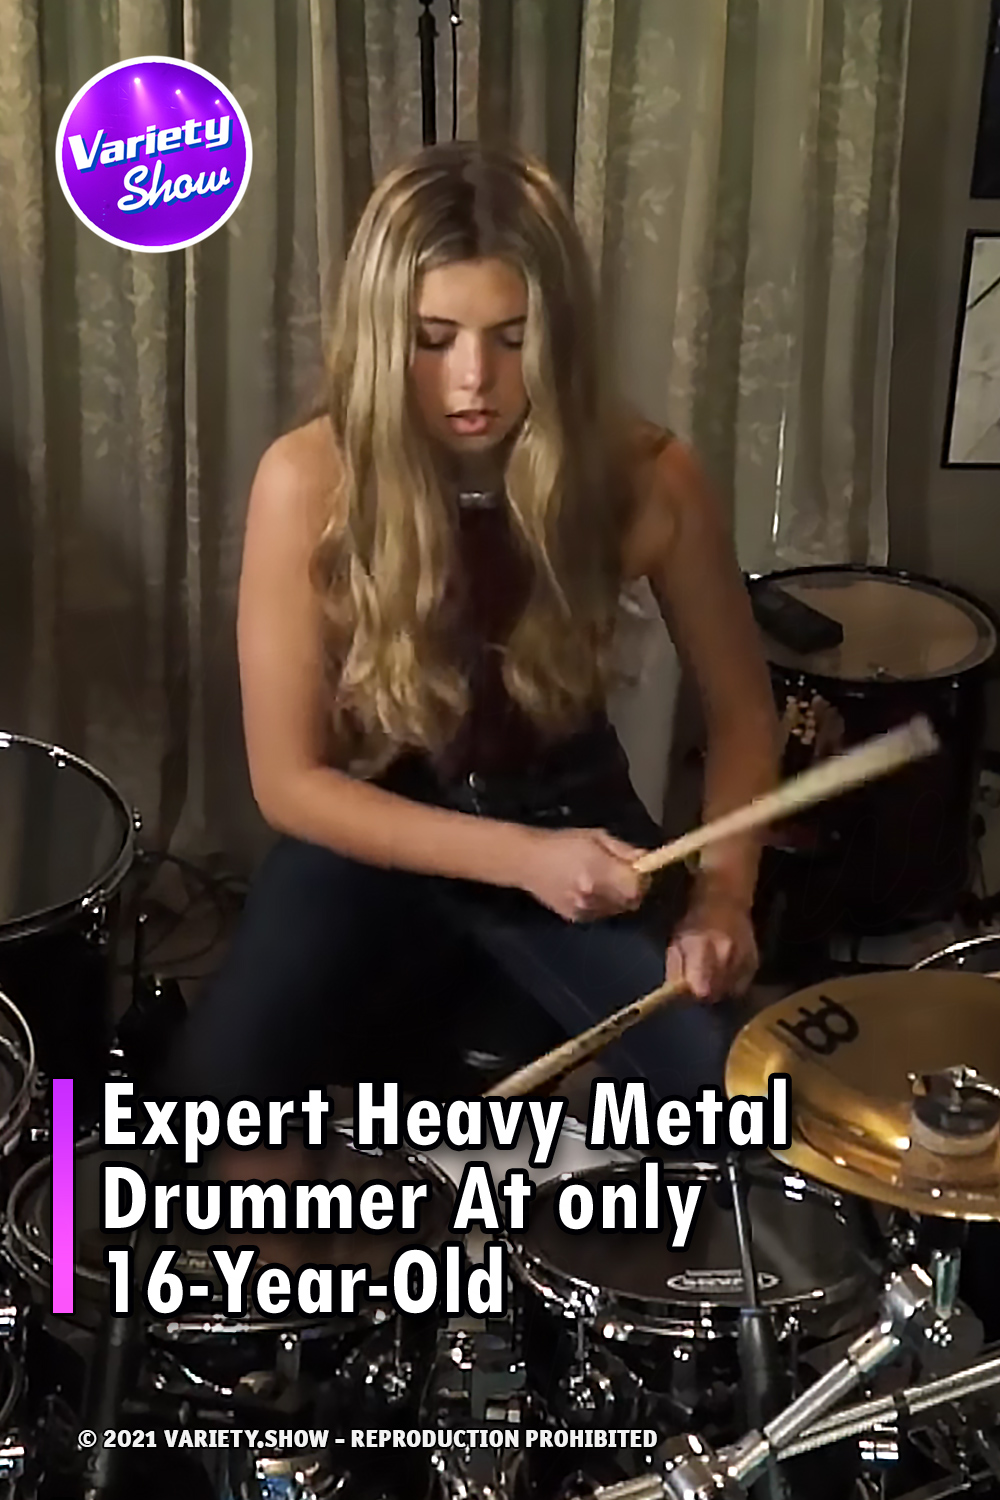 Expert Heavy Metal Drummer At only 16-Year-Old